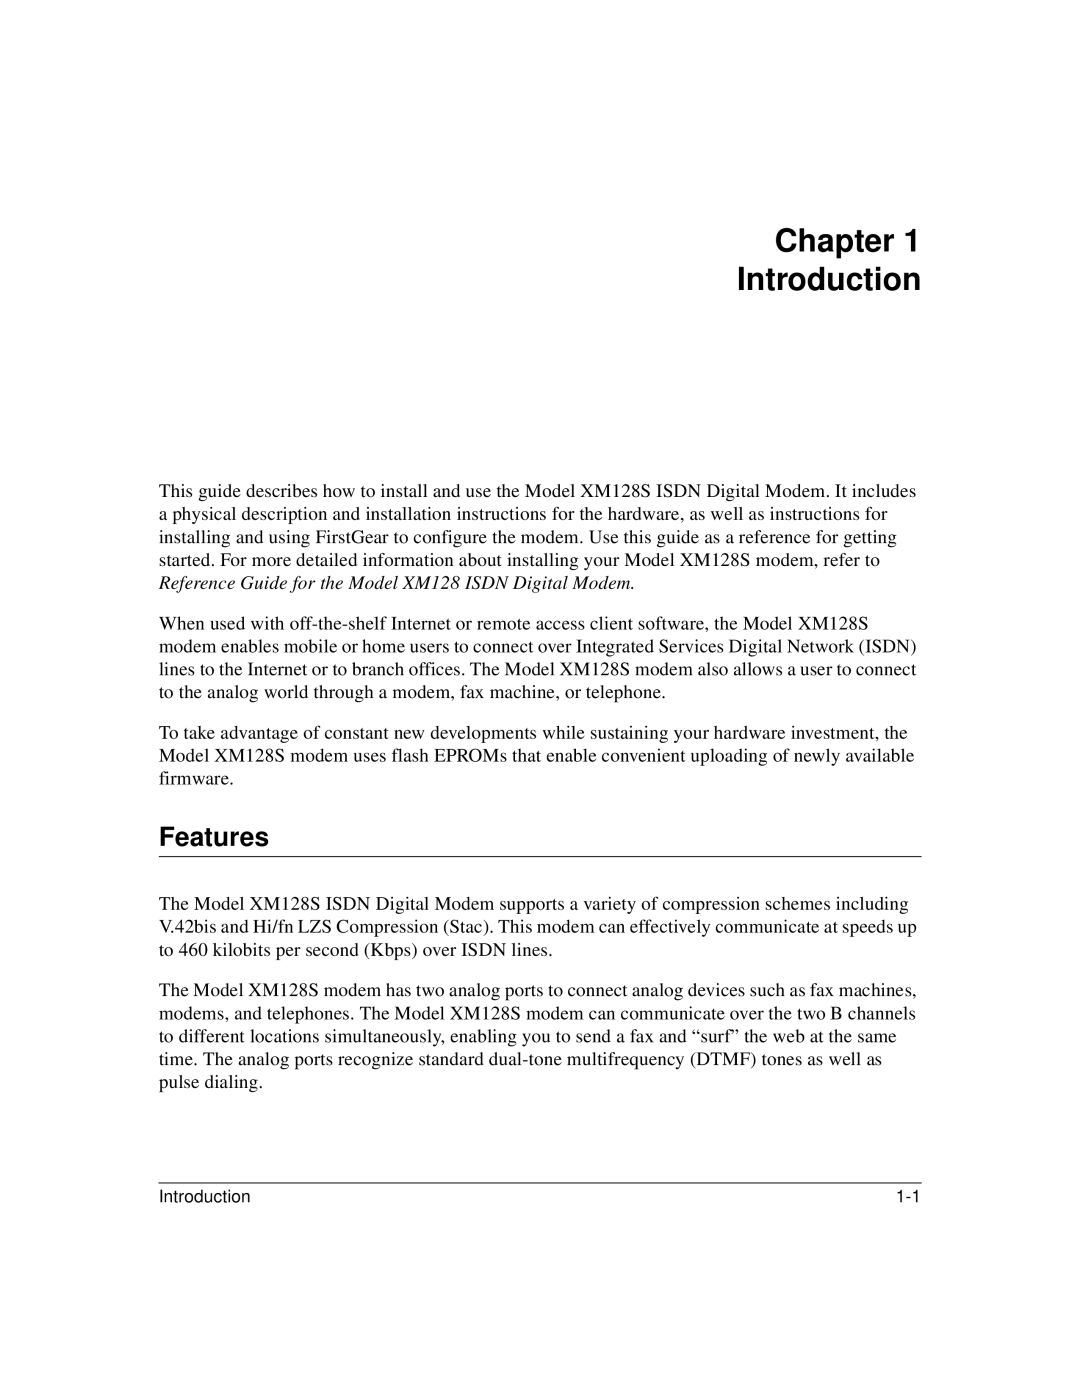 NETGEAR XM128S manual Chapter Introduction, Features 